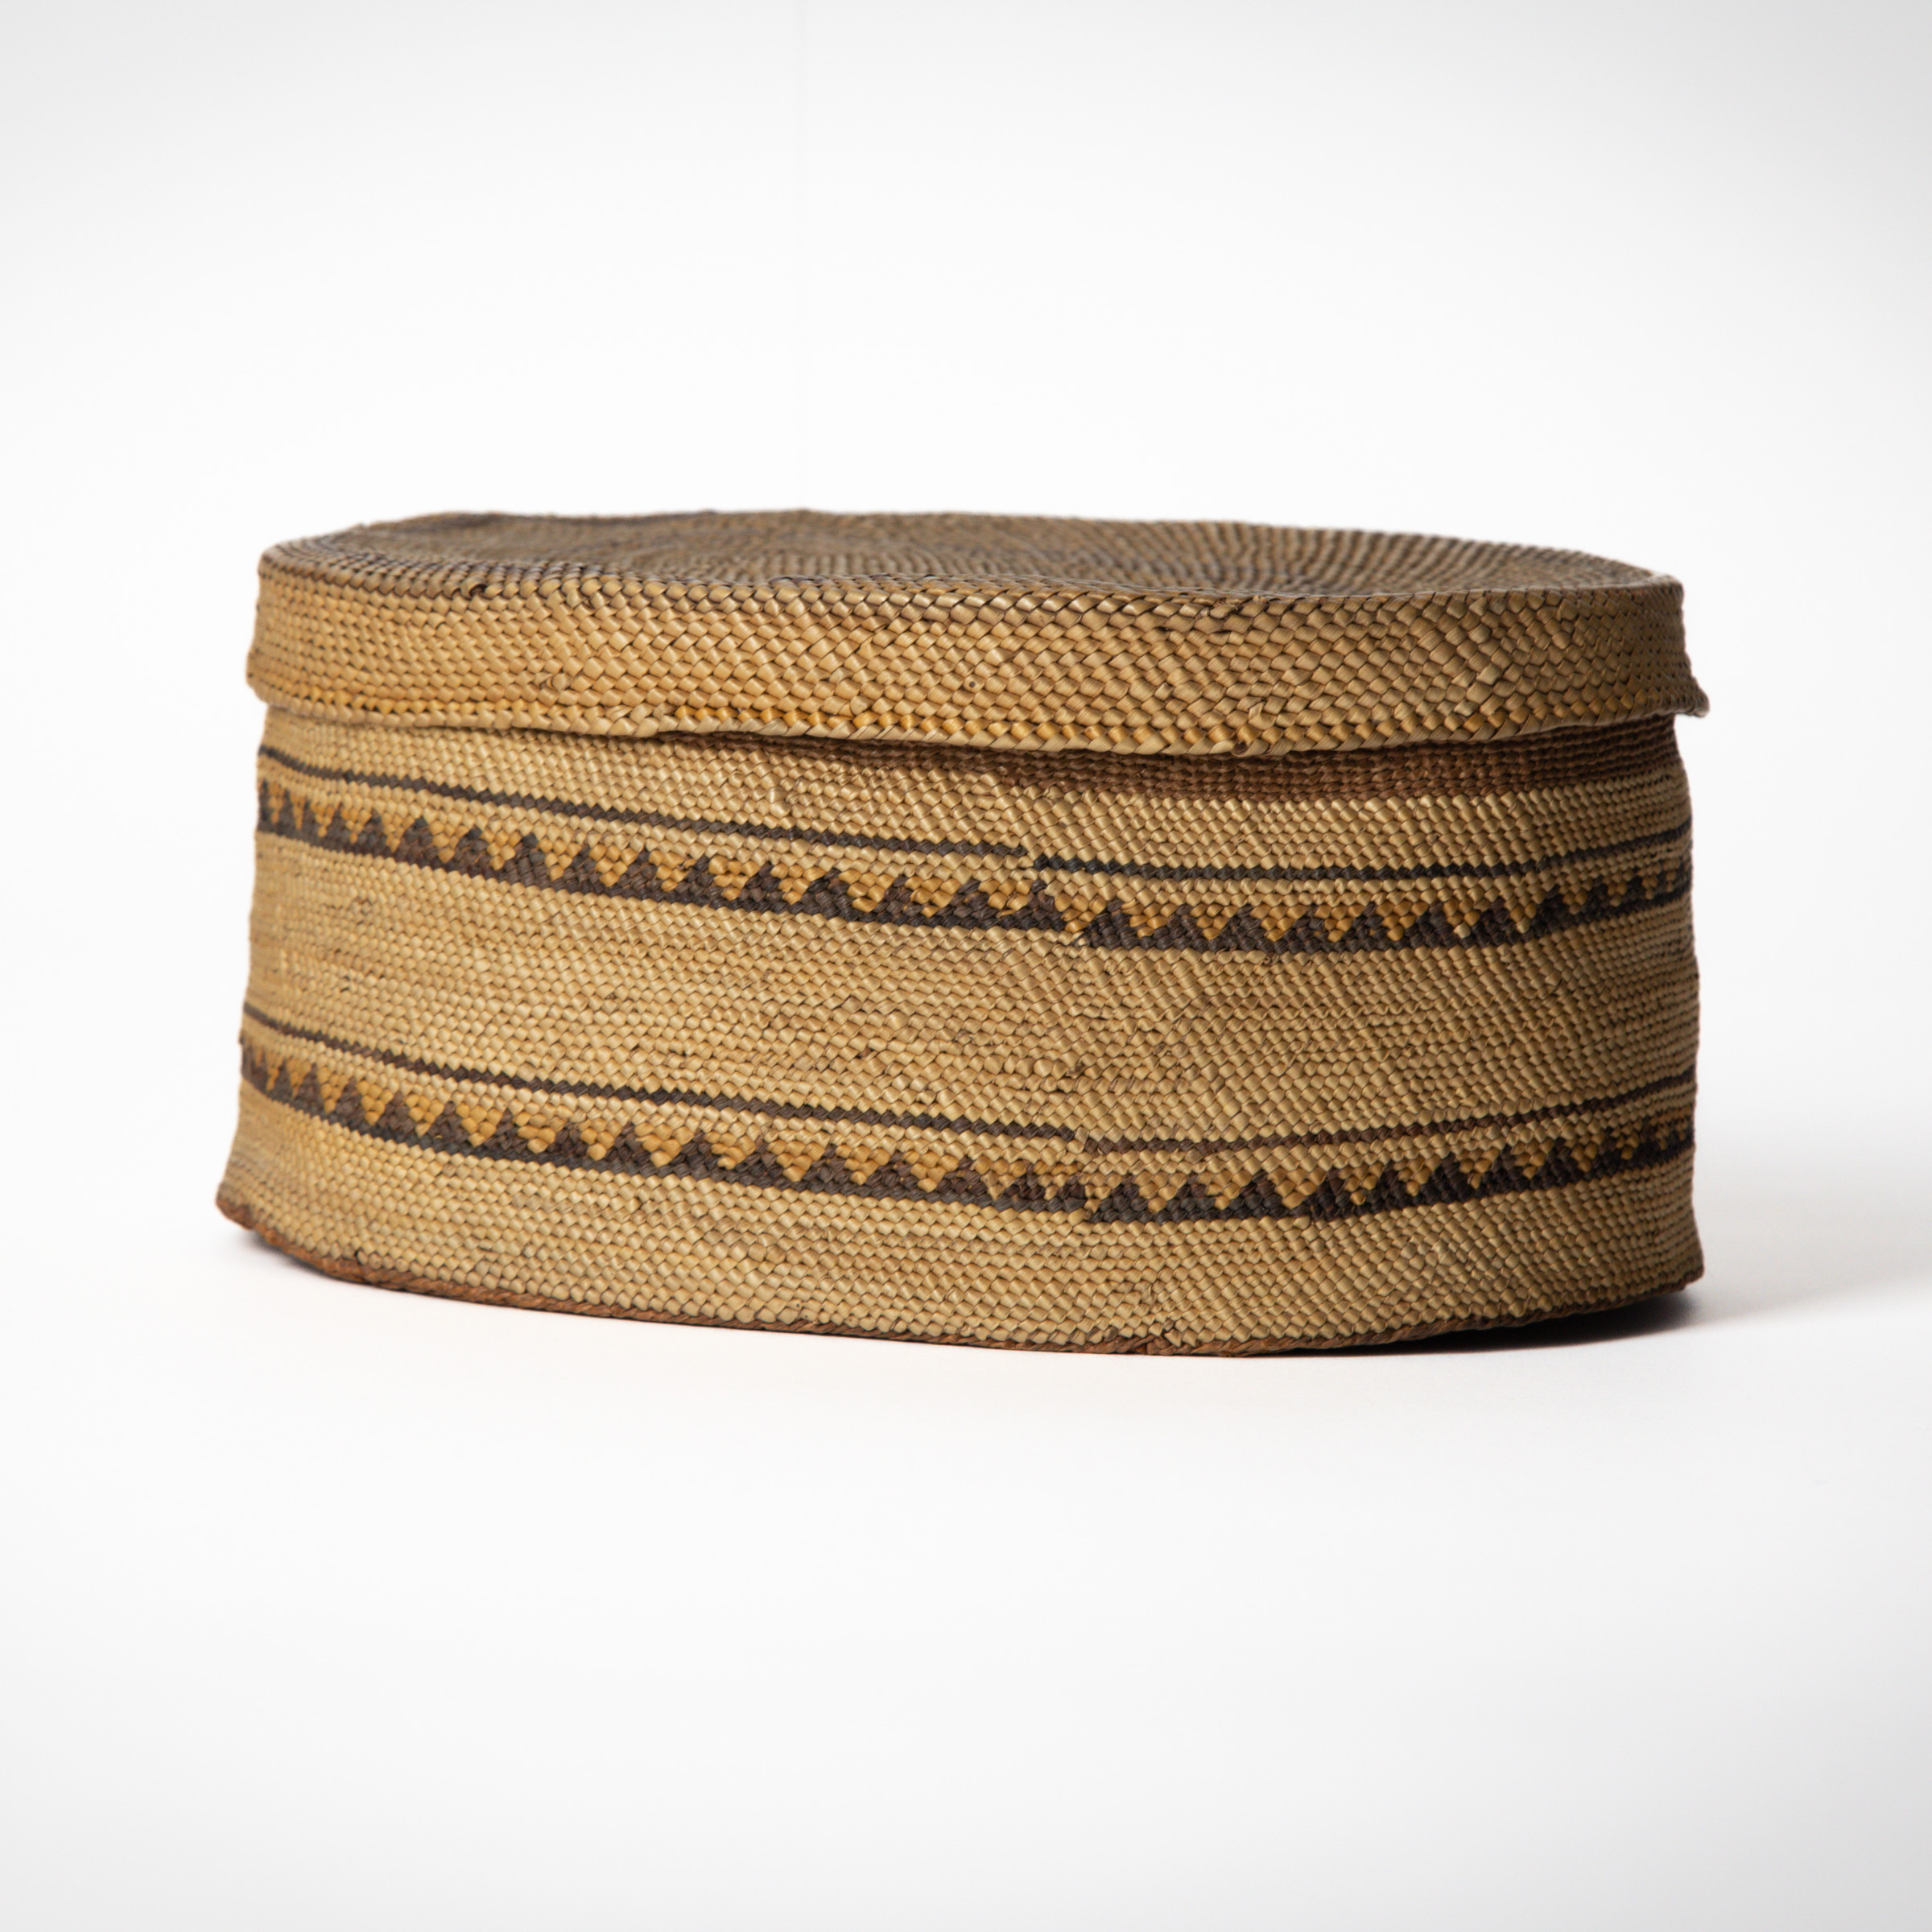 AN EARLY LARGE LIDDED NUU-CHAH-NULTH